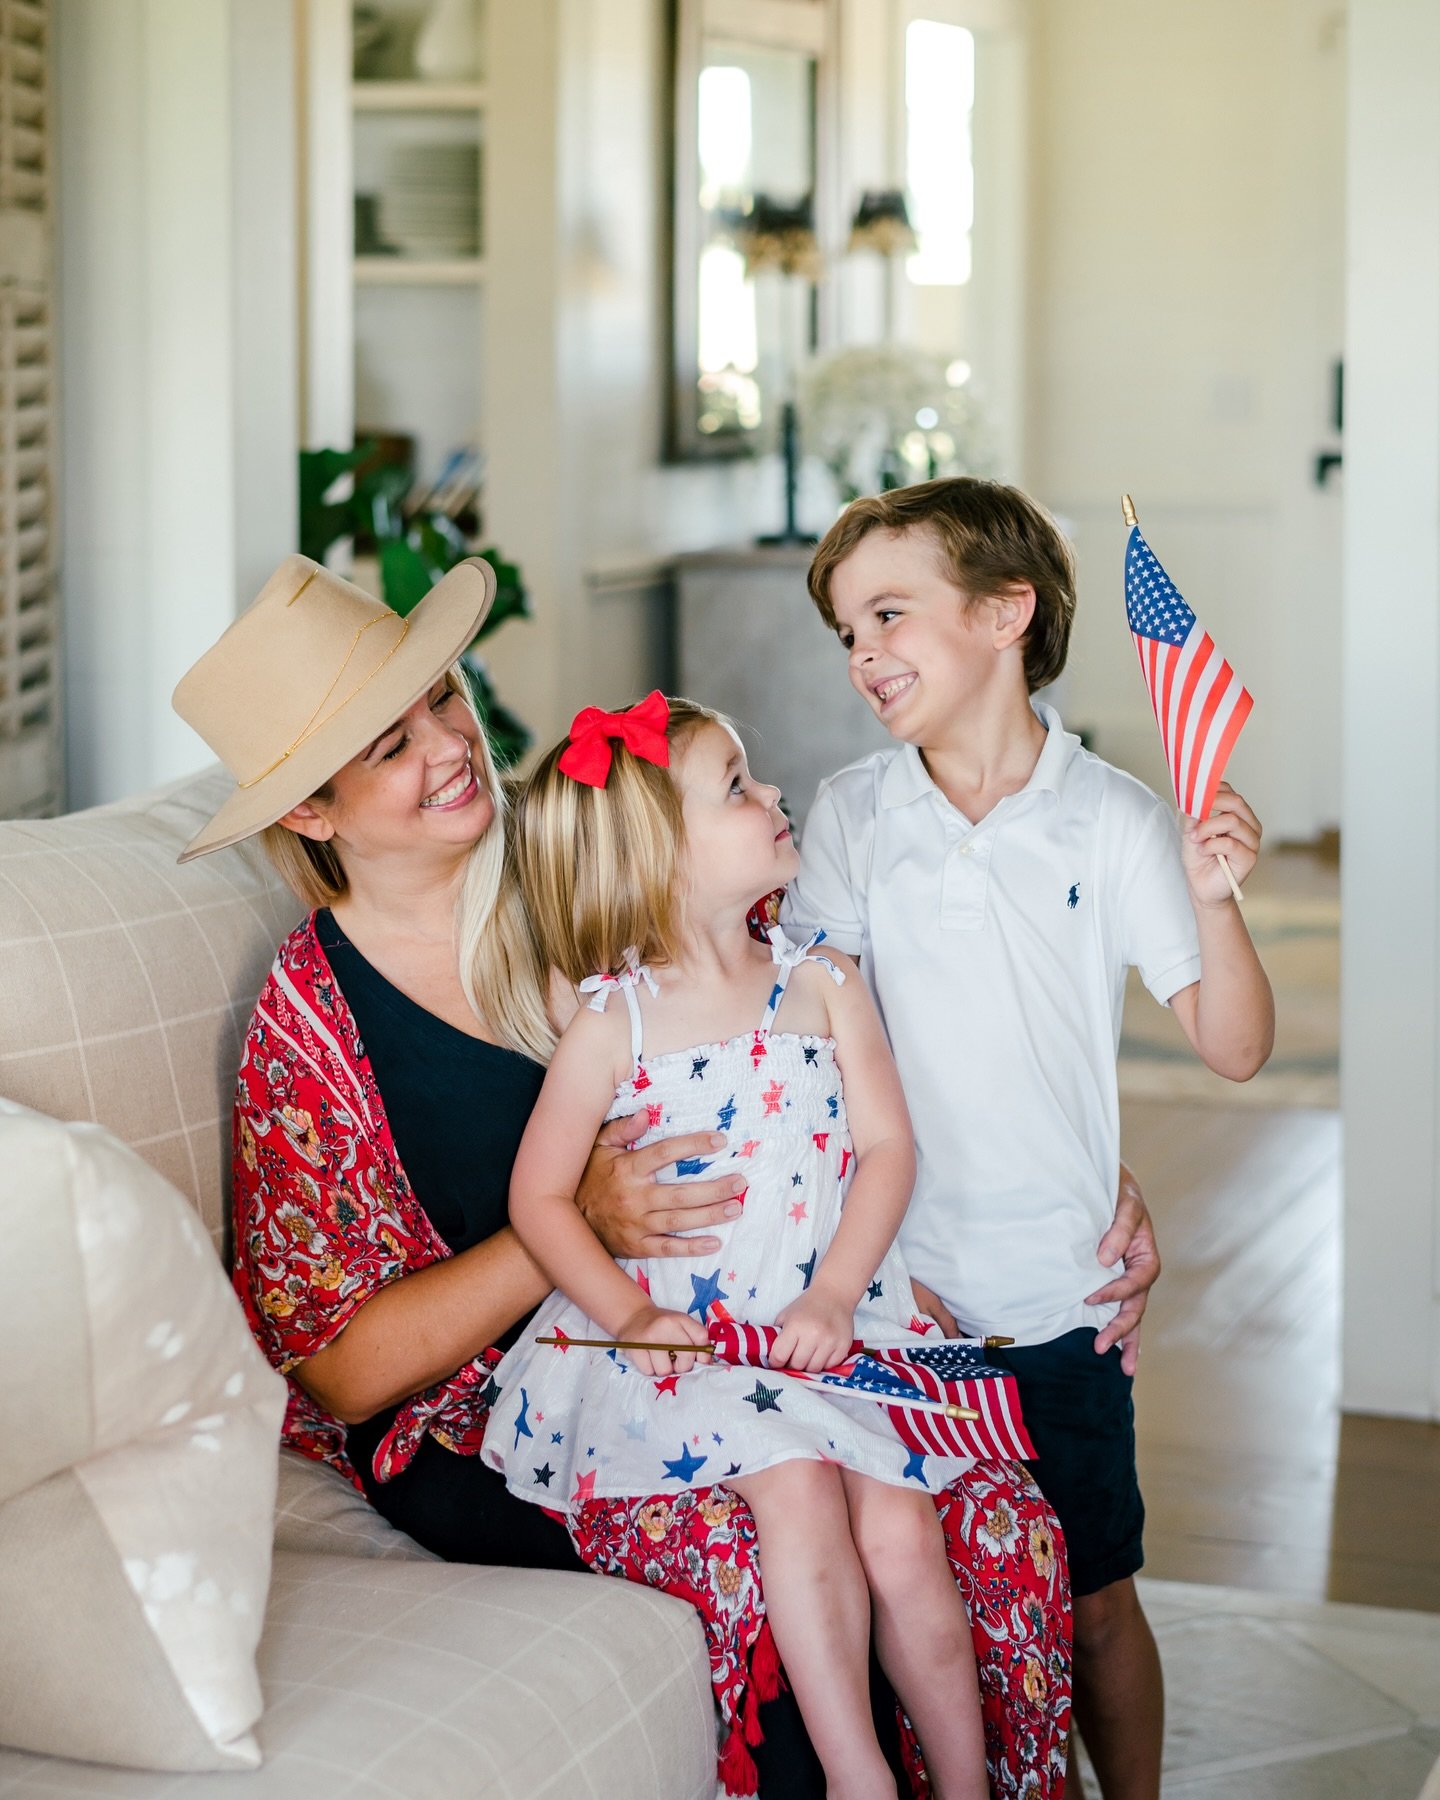 Kick off summer with a memorable Memorial Day getaway! 🇺🇸 Book now to secure your spot in one of our luxury properties and make the most of the long weekend.

📸@ellenreneephotos
____
#vacationrentals #shorttermrentals #staycations #uniquestays #ro